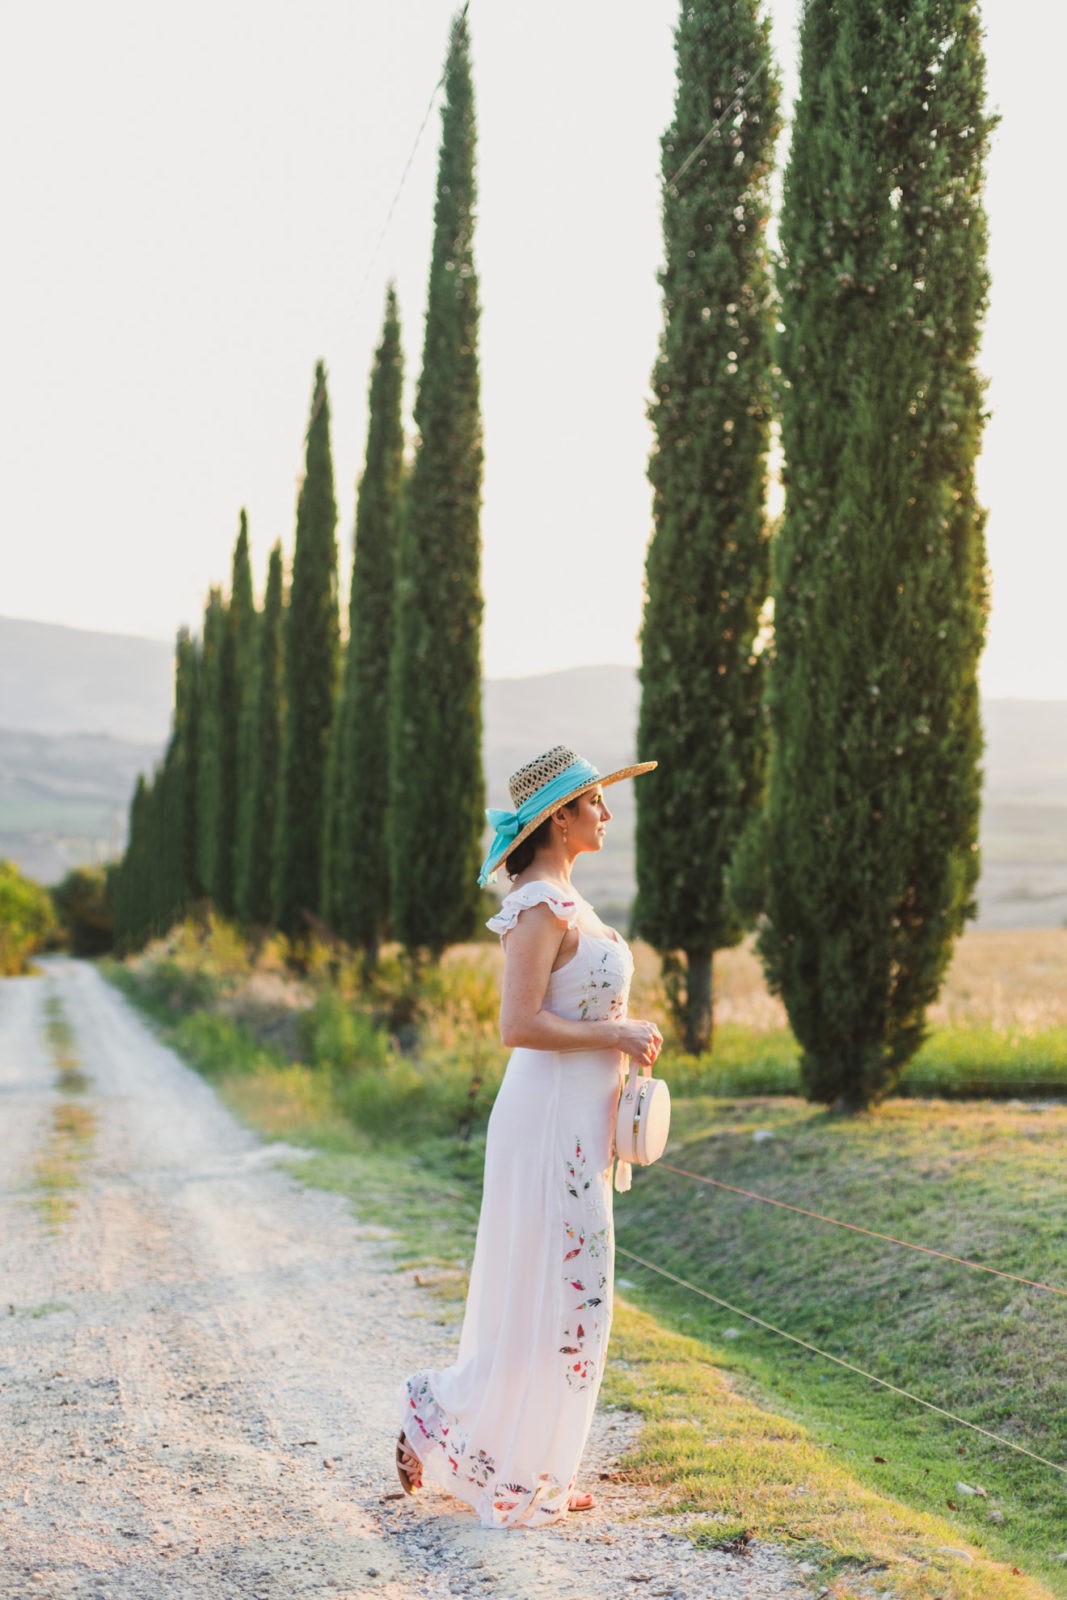 Anthropologie Dress | The Tuscan Countryside + Italy Recap featured by popular Los Angeles travel blogger Laura Lily